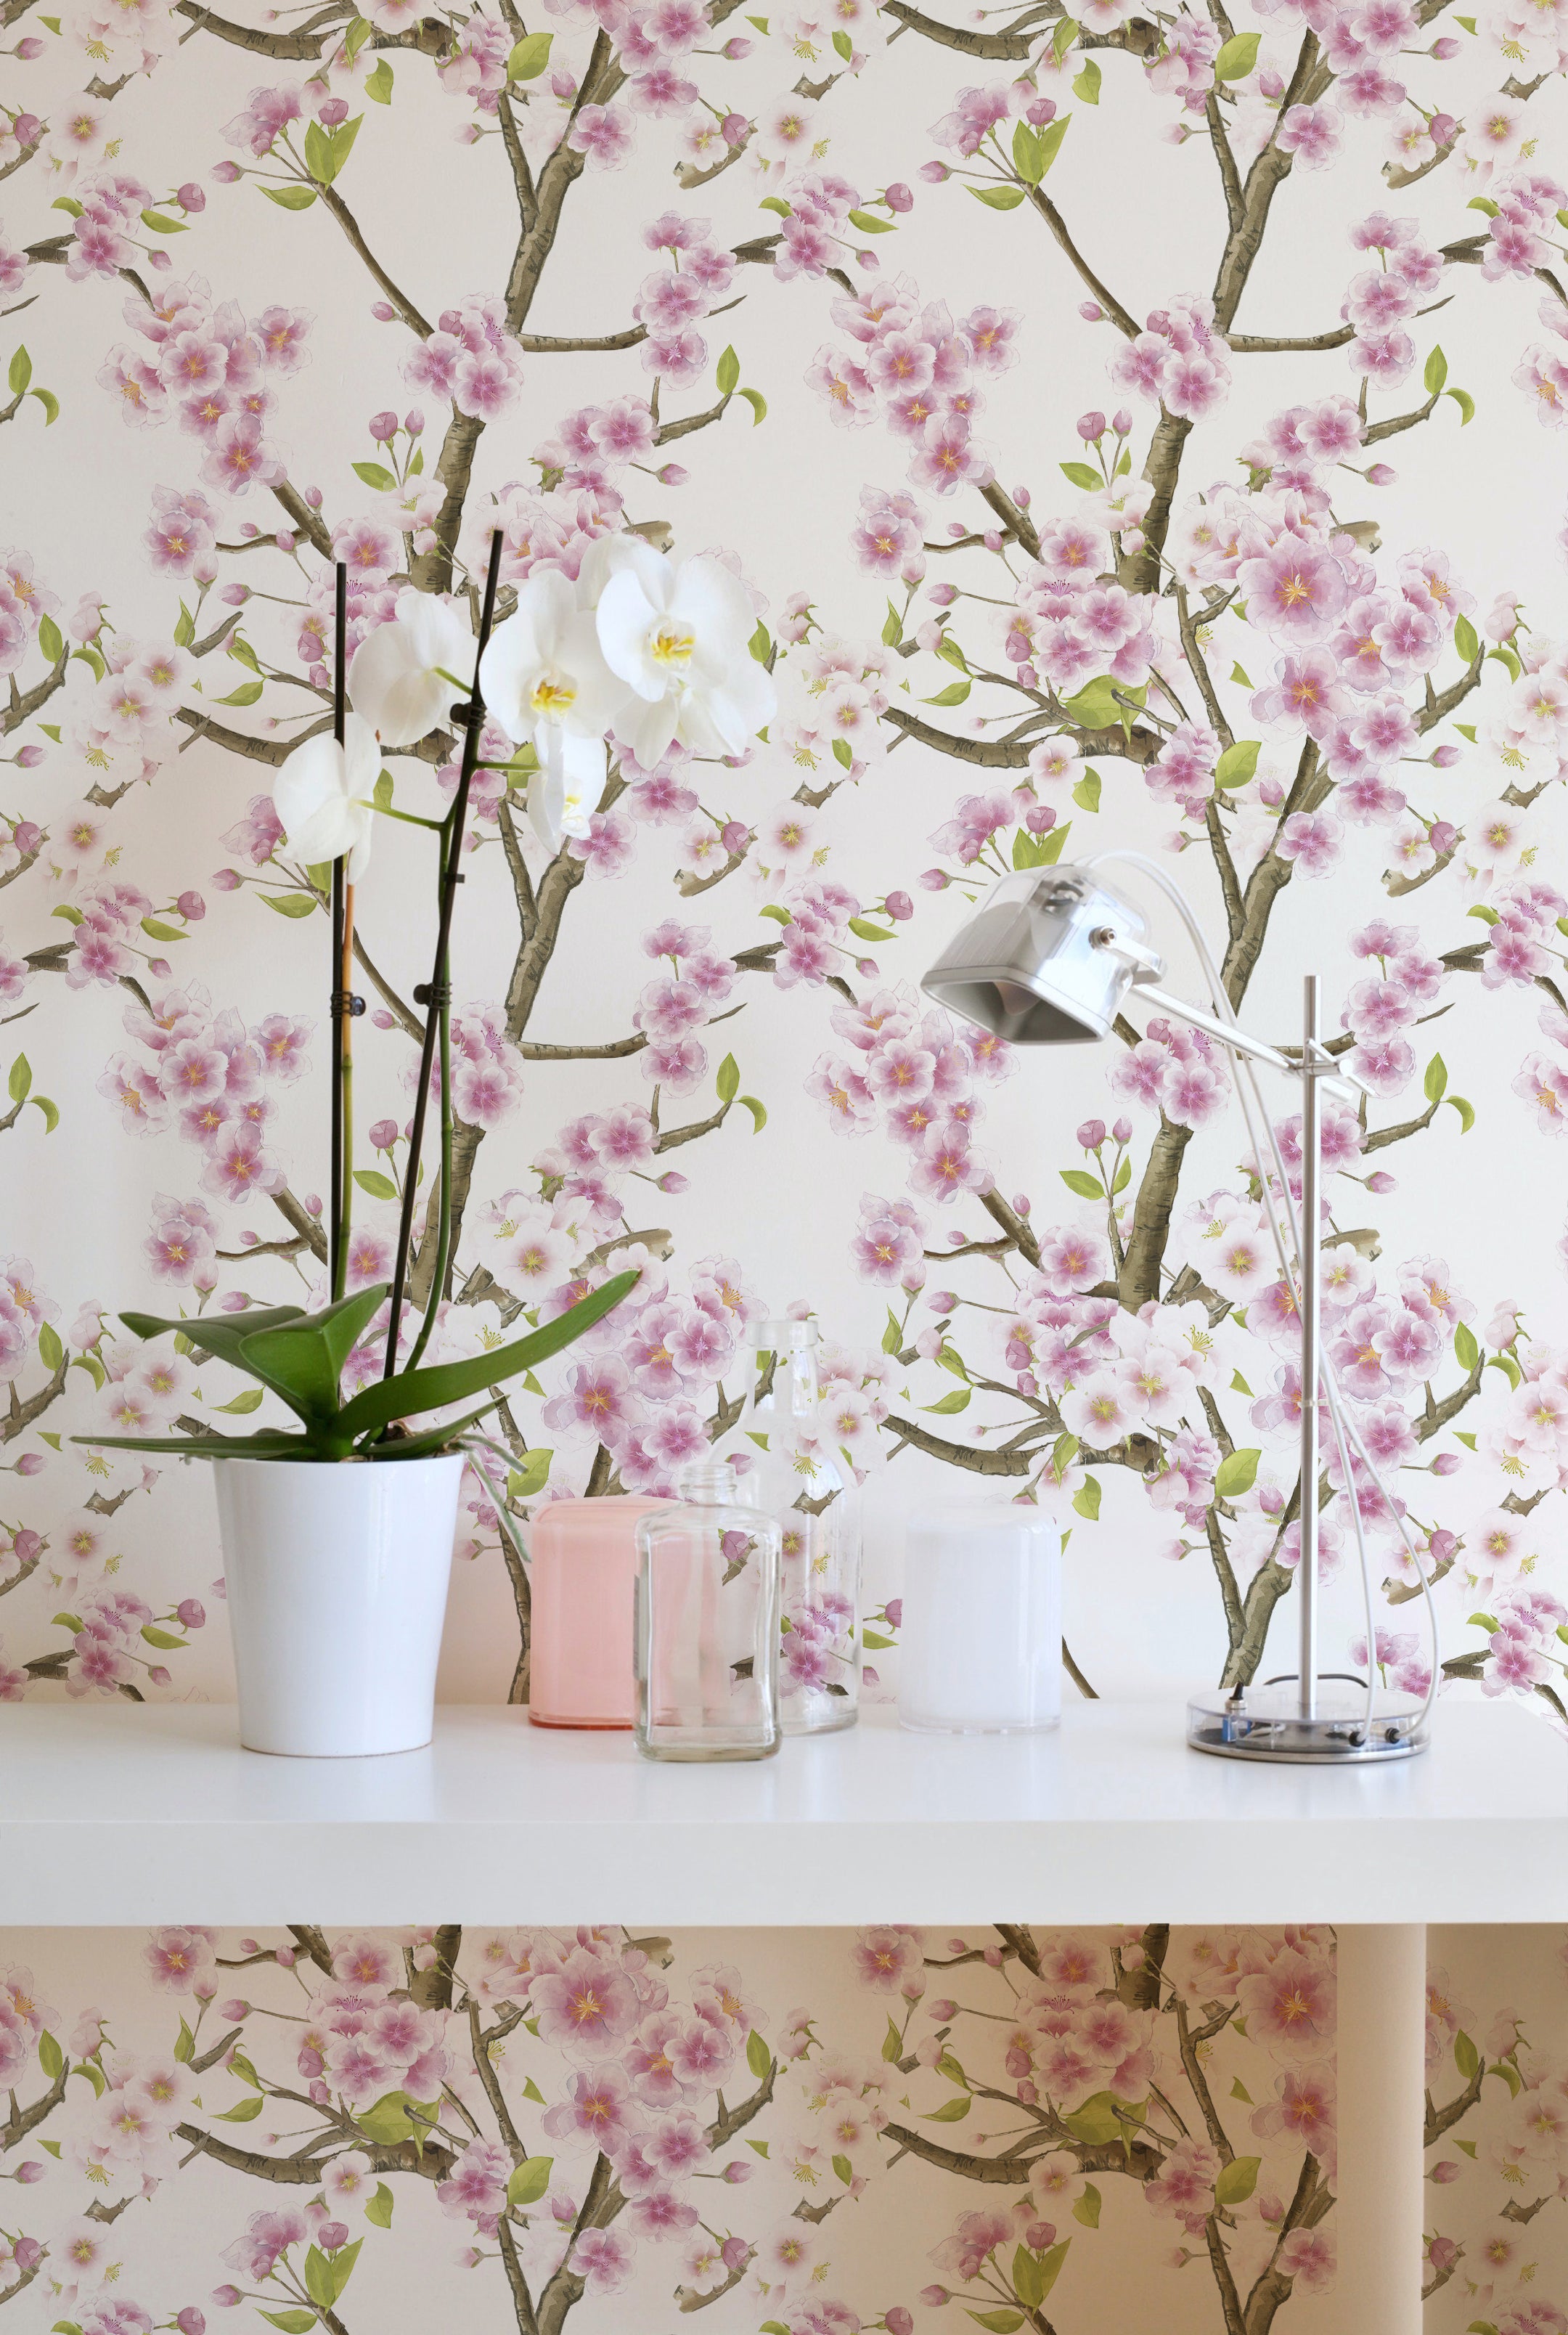 Sakura Blossom Wallpaper enhancing a contemporary bathroom setting, with vibrant pink cherry blossoms on slender branches spread across a white background, paired with modern decor and natural elements for a refreshing interior.